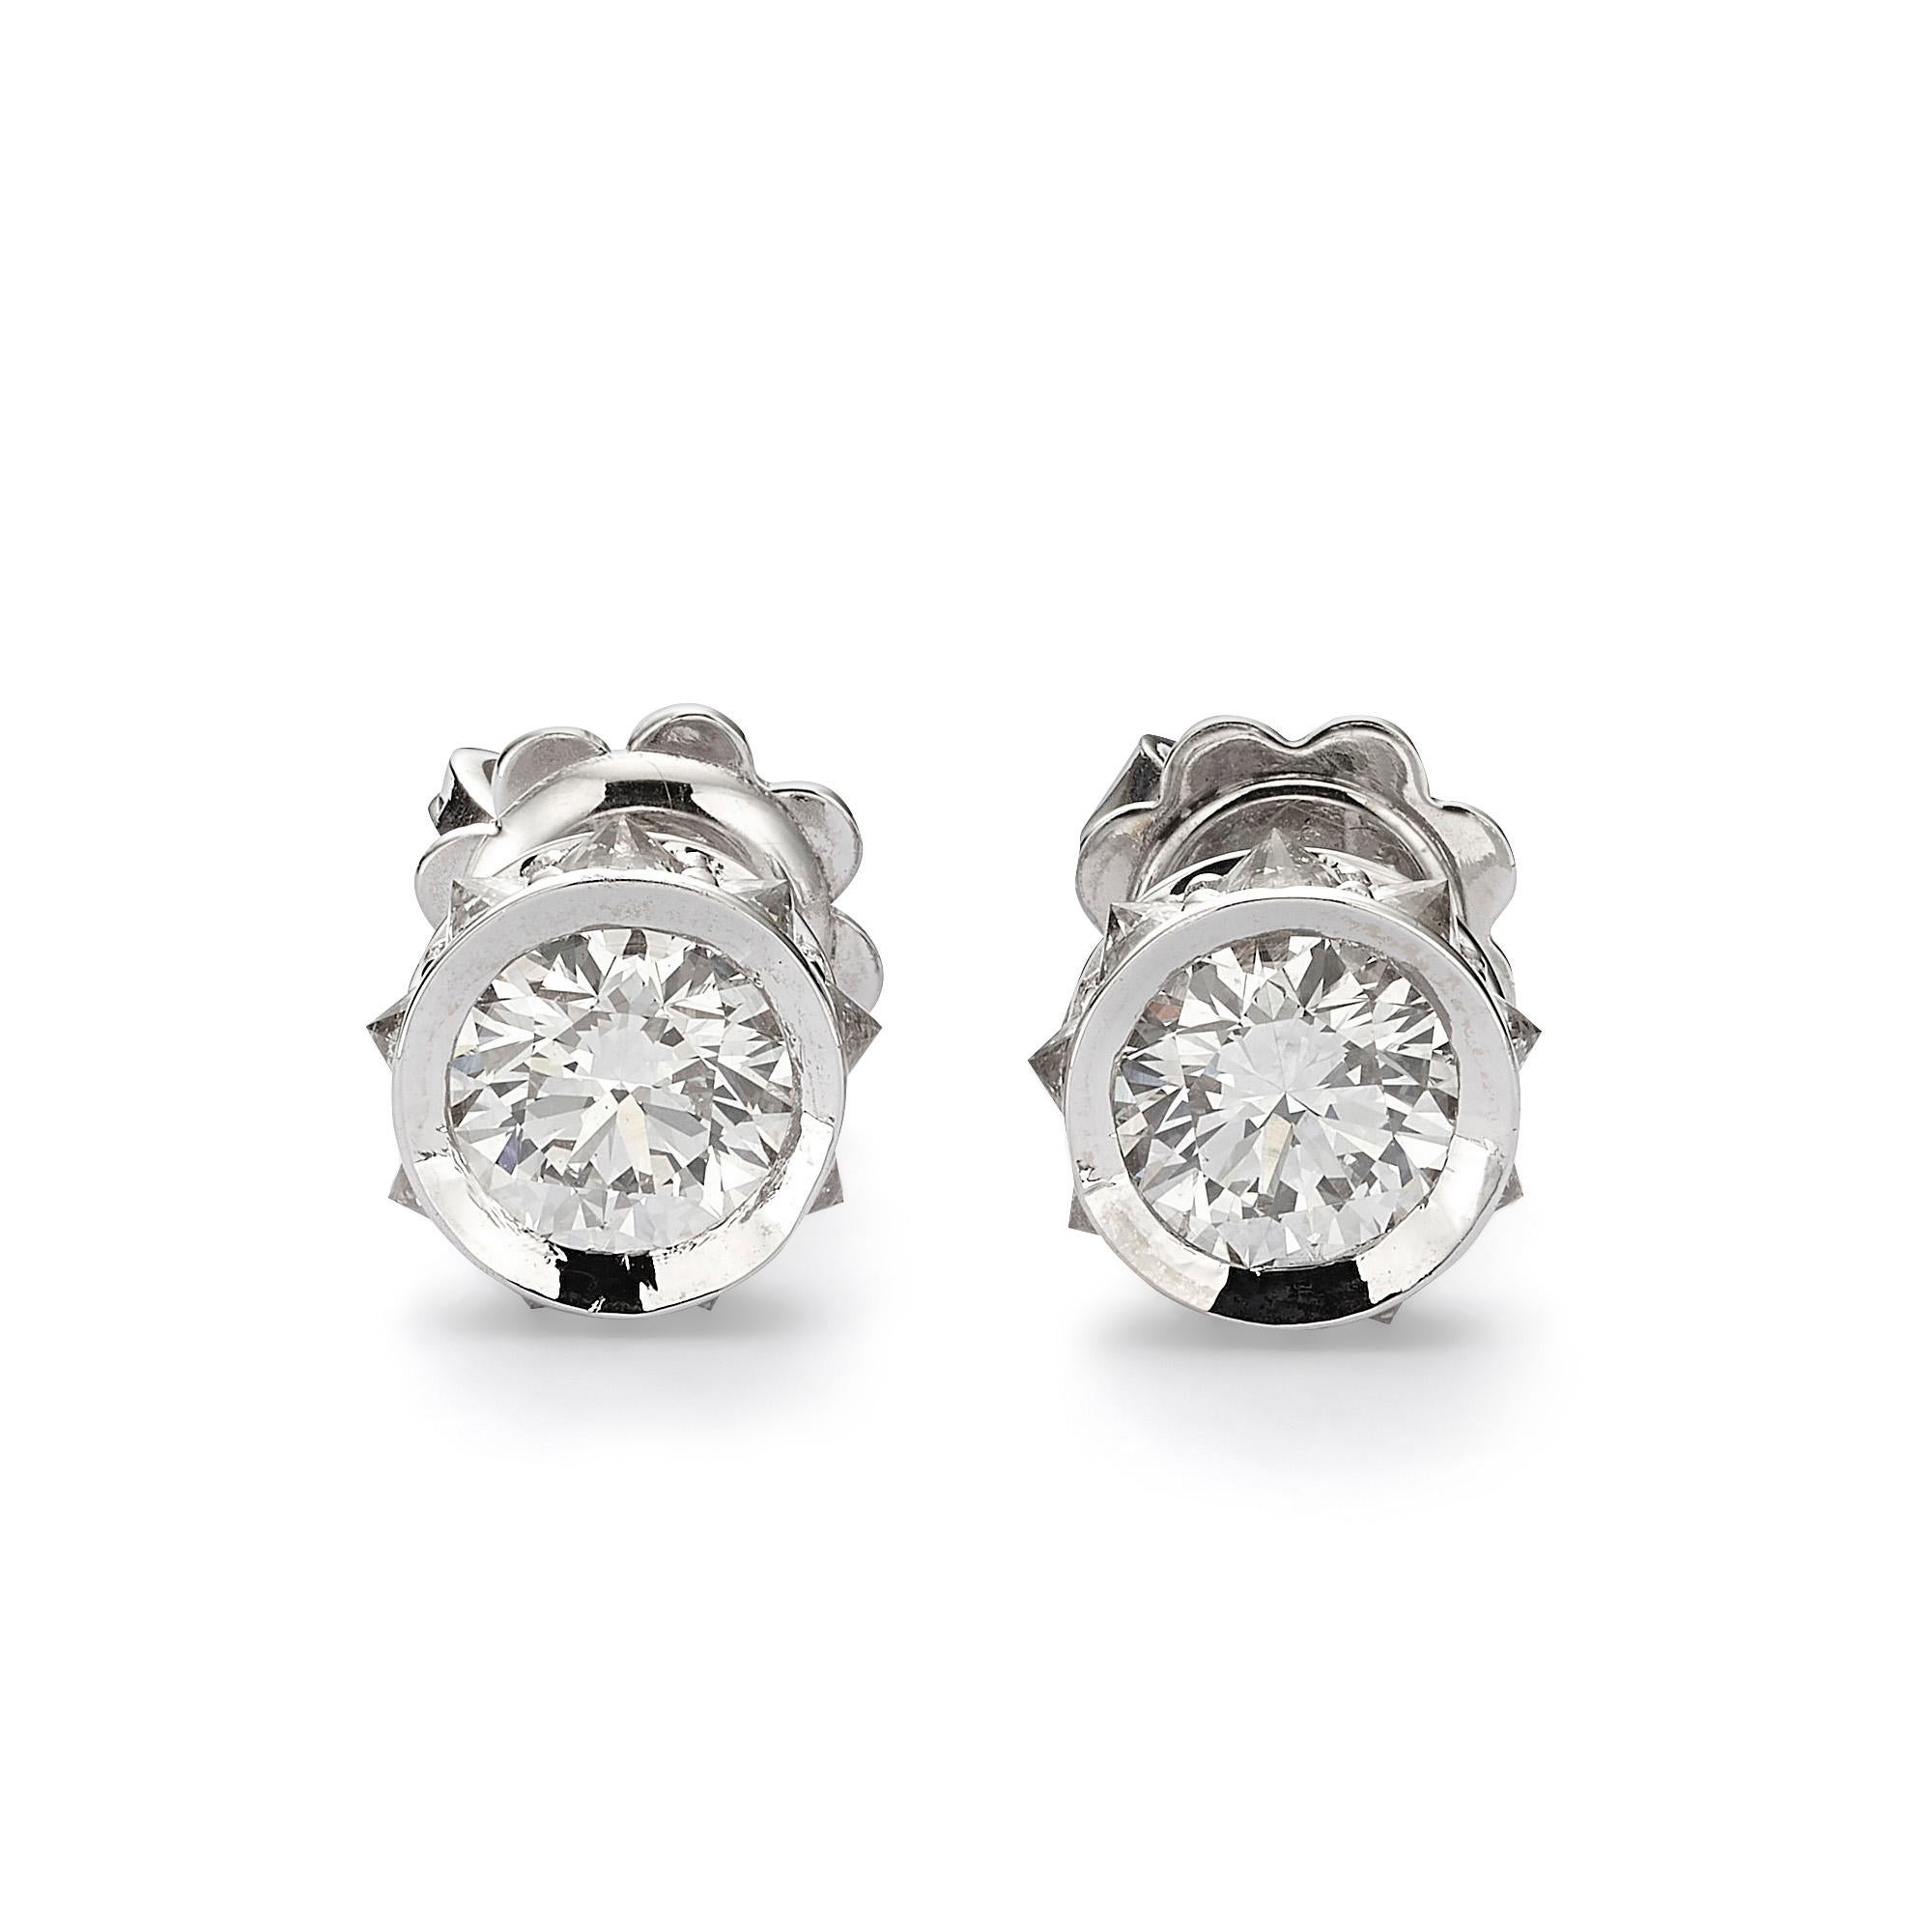 These stunning earrings exemplify a captivating design that flawlessly combines elegance and craftsmanship. Expertly crafted from 18K white gold, they showcase two exquisite GIA-certified round diamonds, each boasting a G color grade and SI1